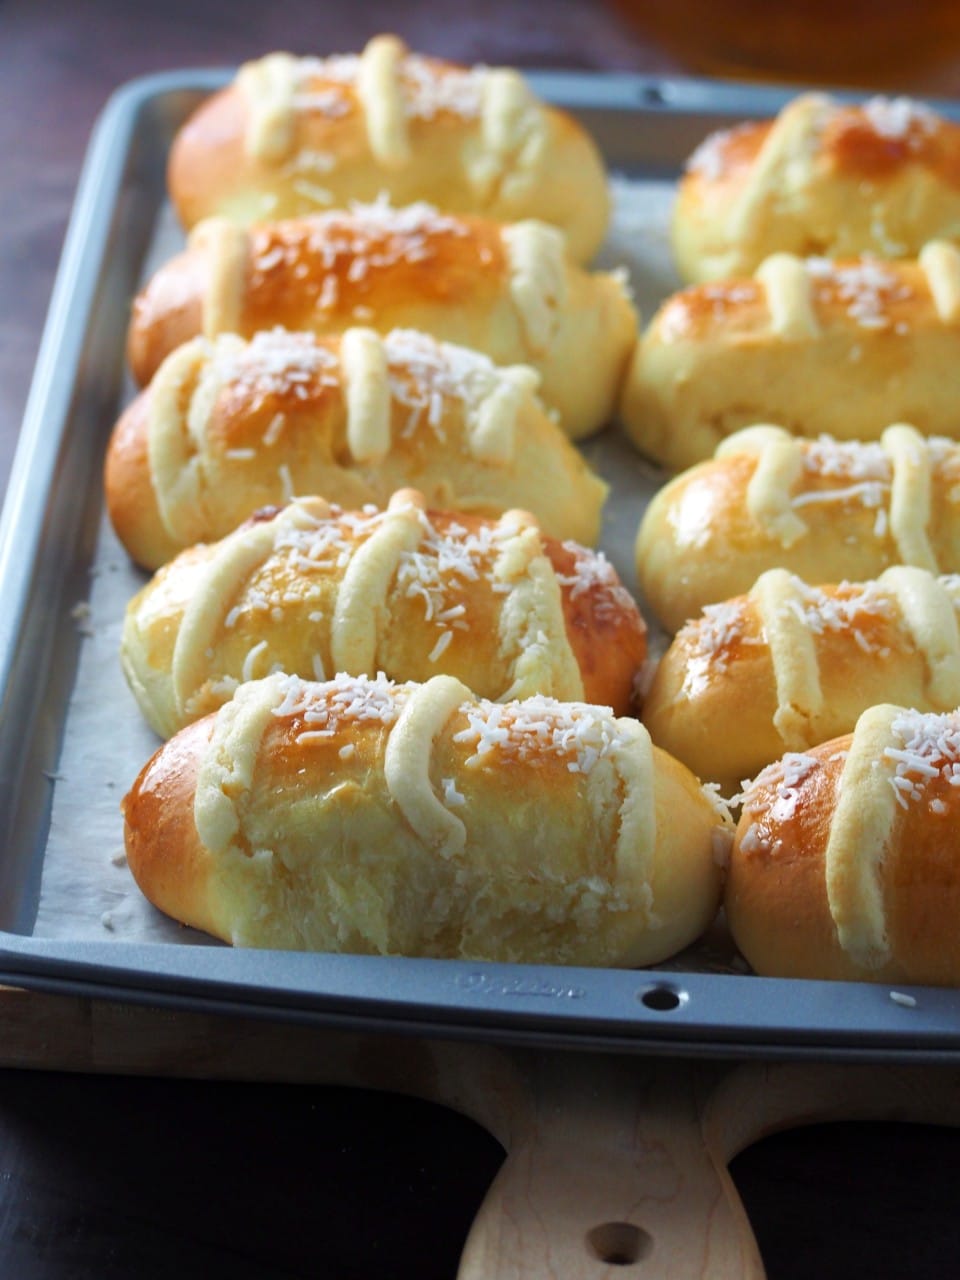 Freshly baked coconut buns on a baking tray.